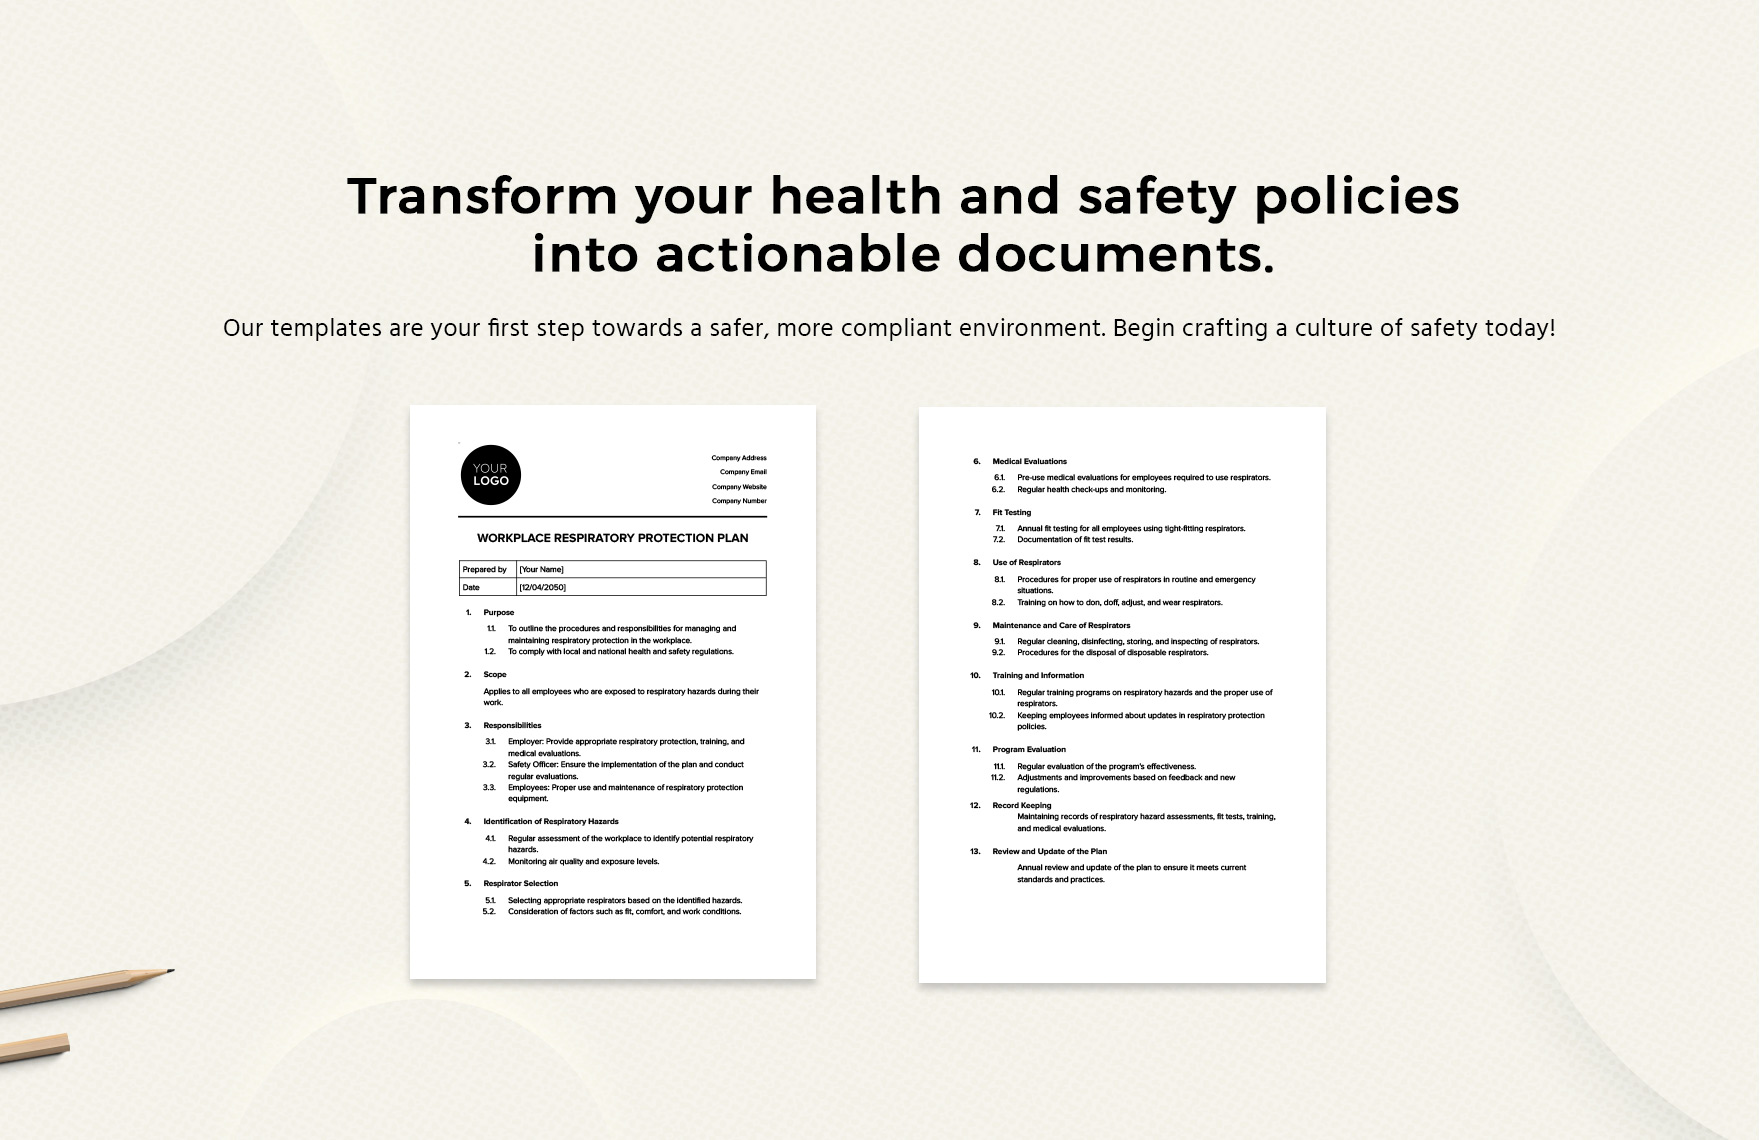 Workplace Respiratory Protection Plan Template